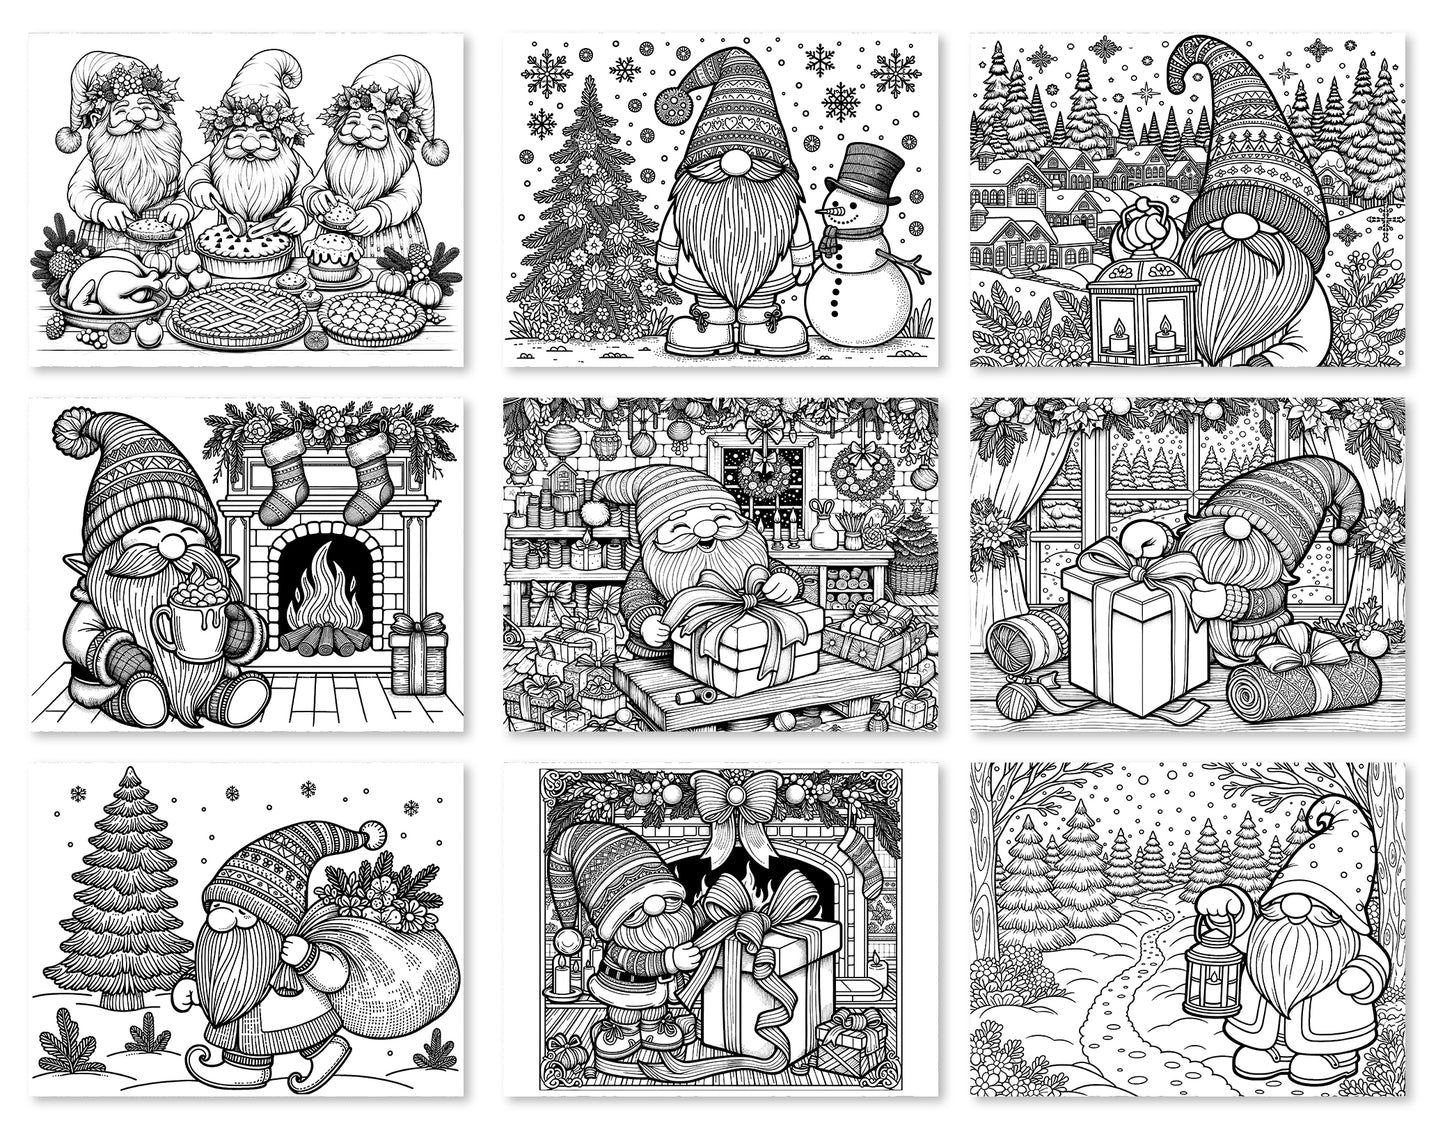 50 Christmas Gnomes Coloring Pages - Instant Download - Printable PDF